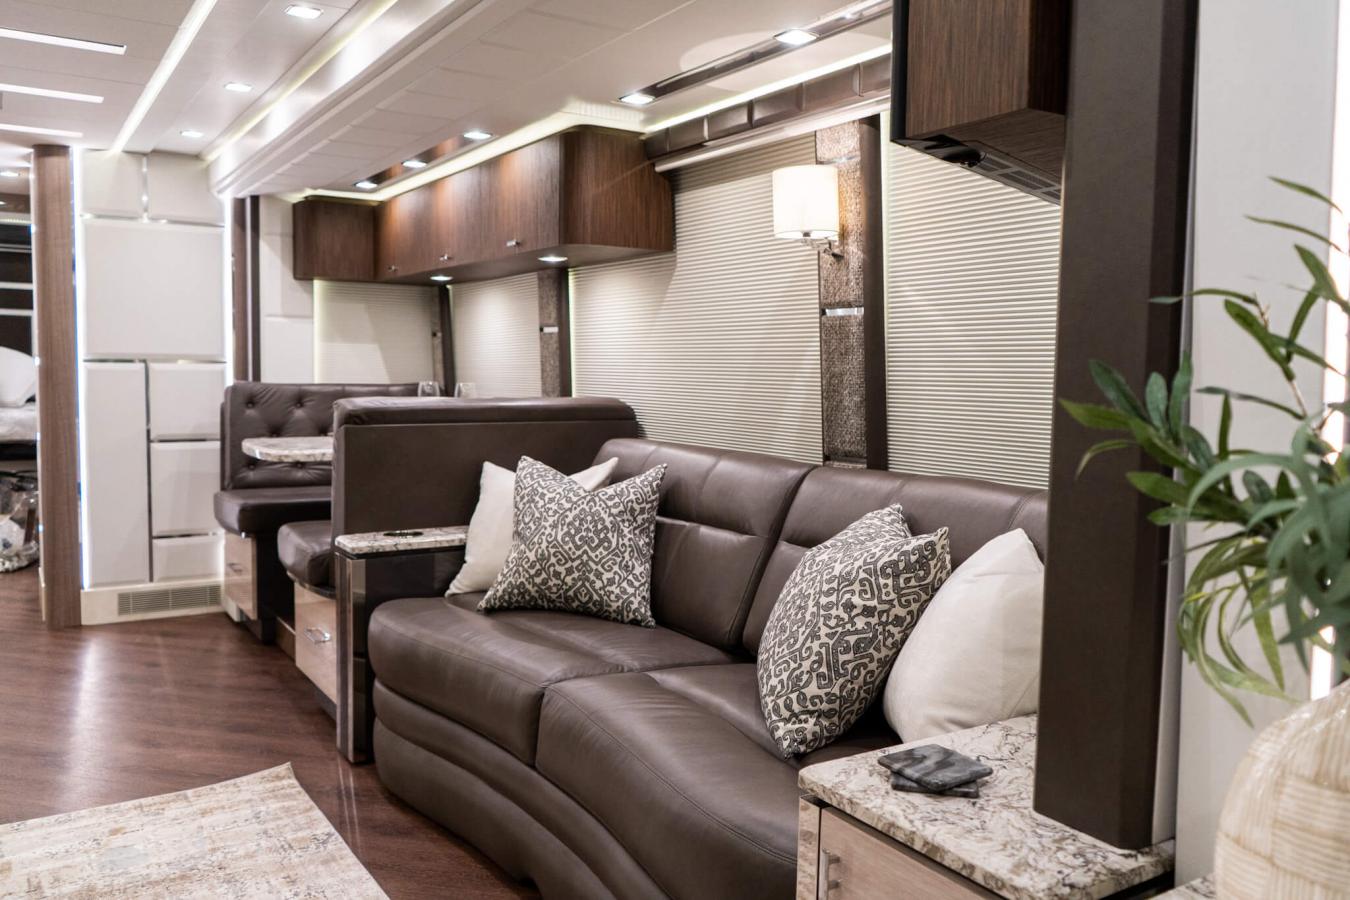 An interior shot of Emerald Luxury Coach RV with brown cabinets and a brown seating area